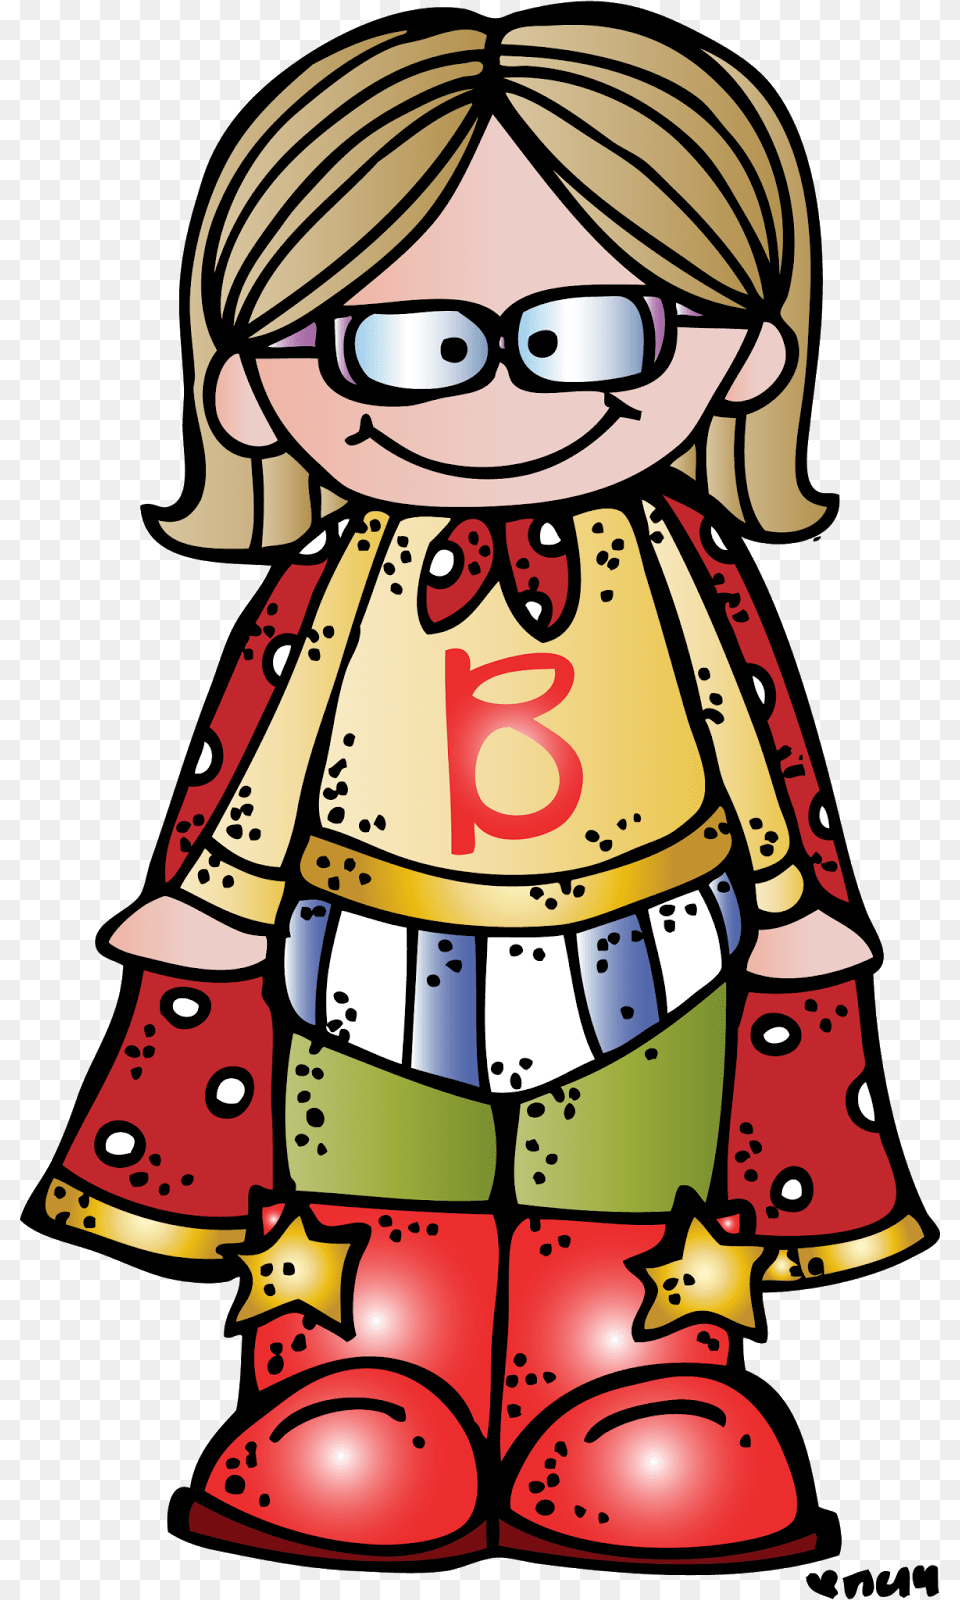 Melonheadz July Heroi Xica Melonheazd, Baby, Person, Accessories, Glasses Png